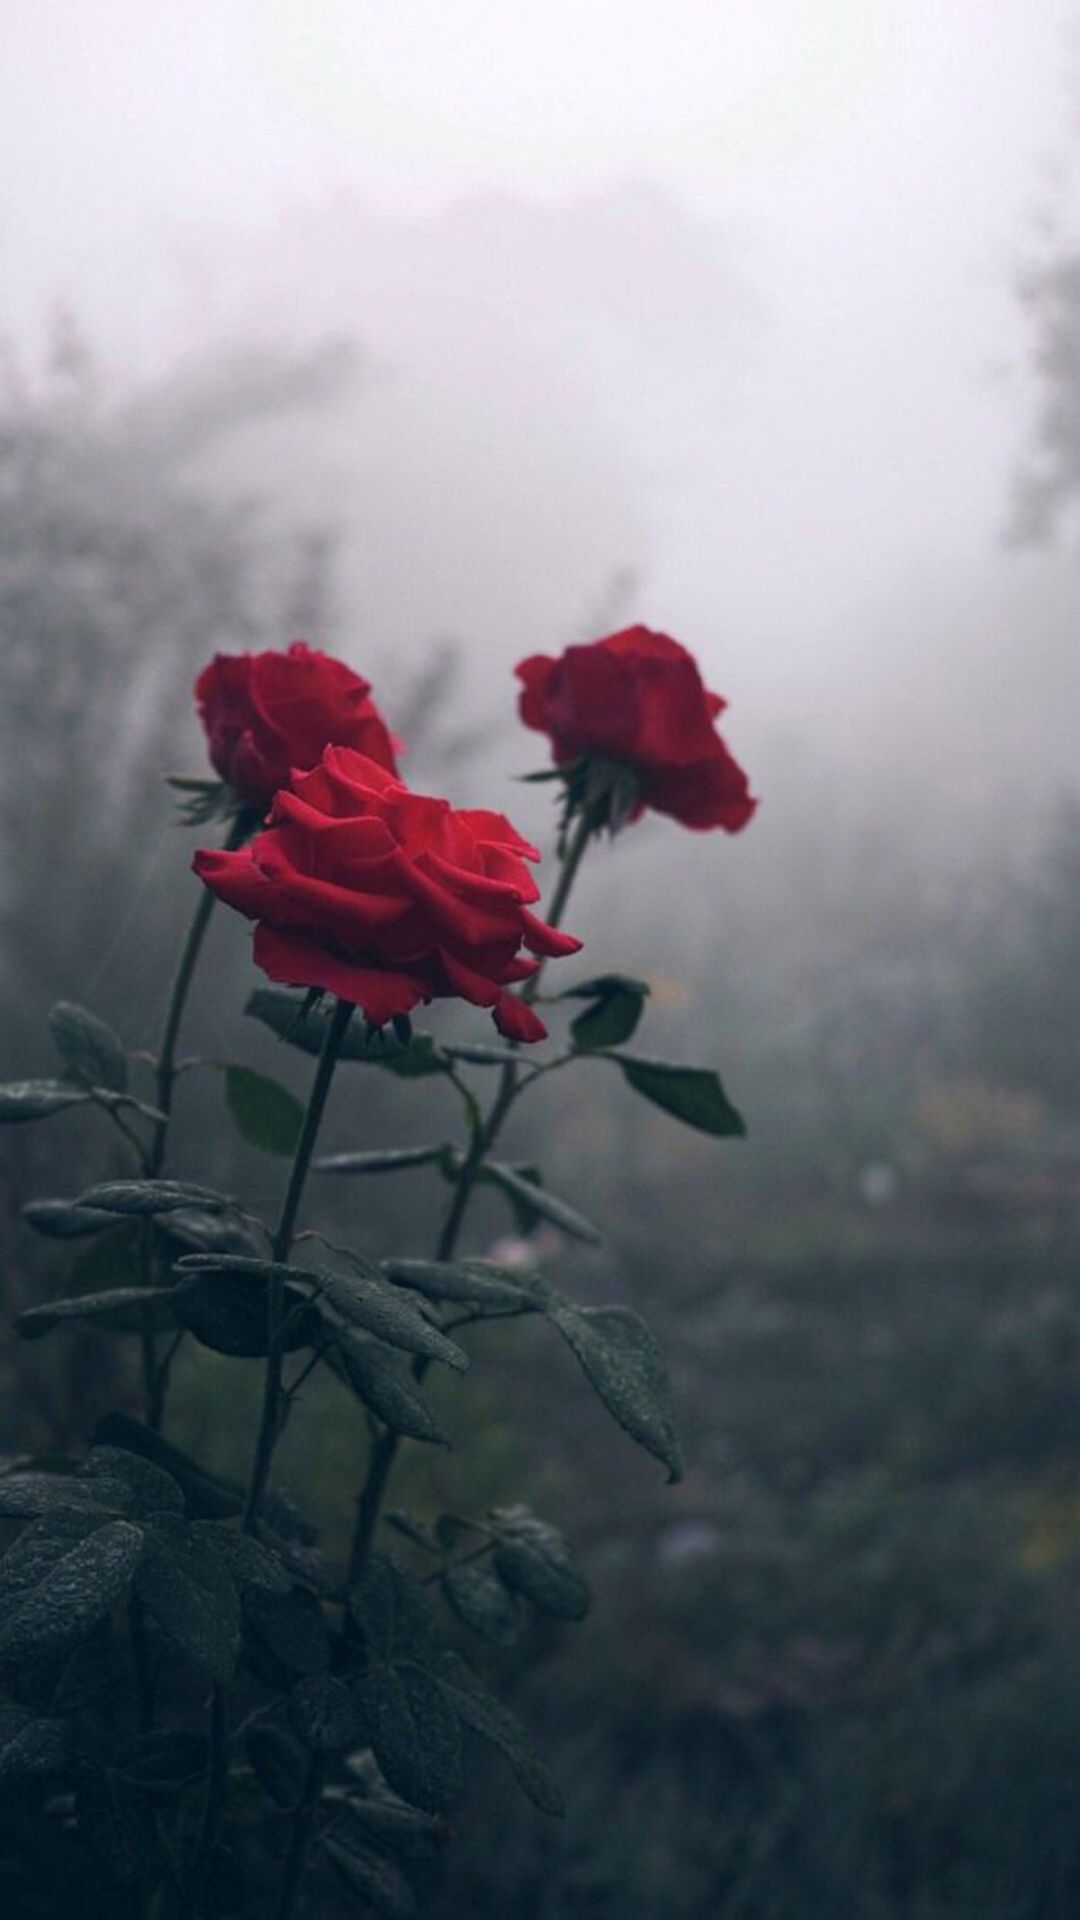 IPhone wallpaper of three red roses in the fog. - Roses, garden, fog